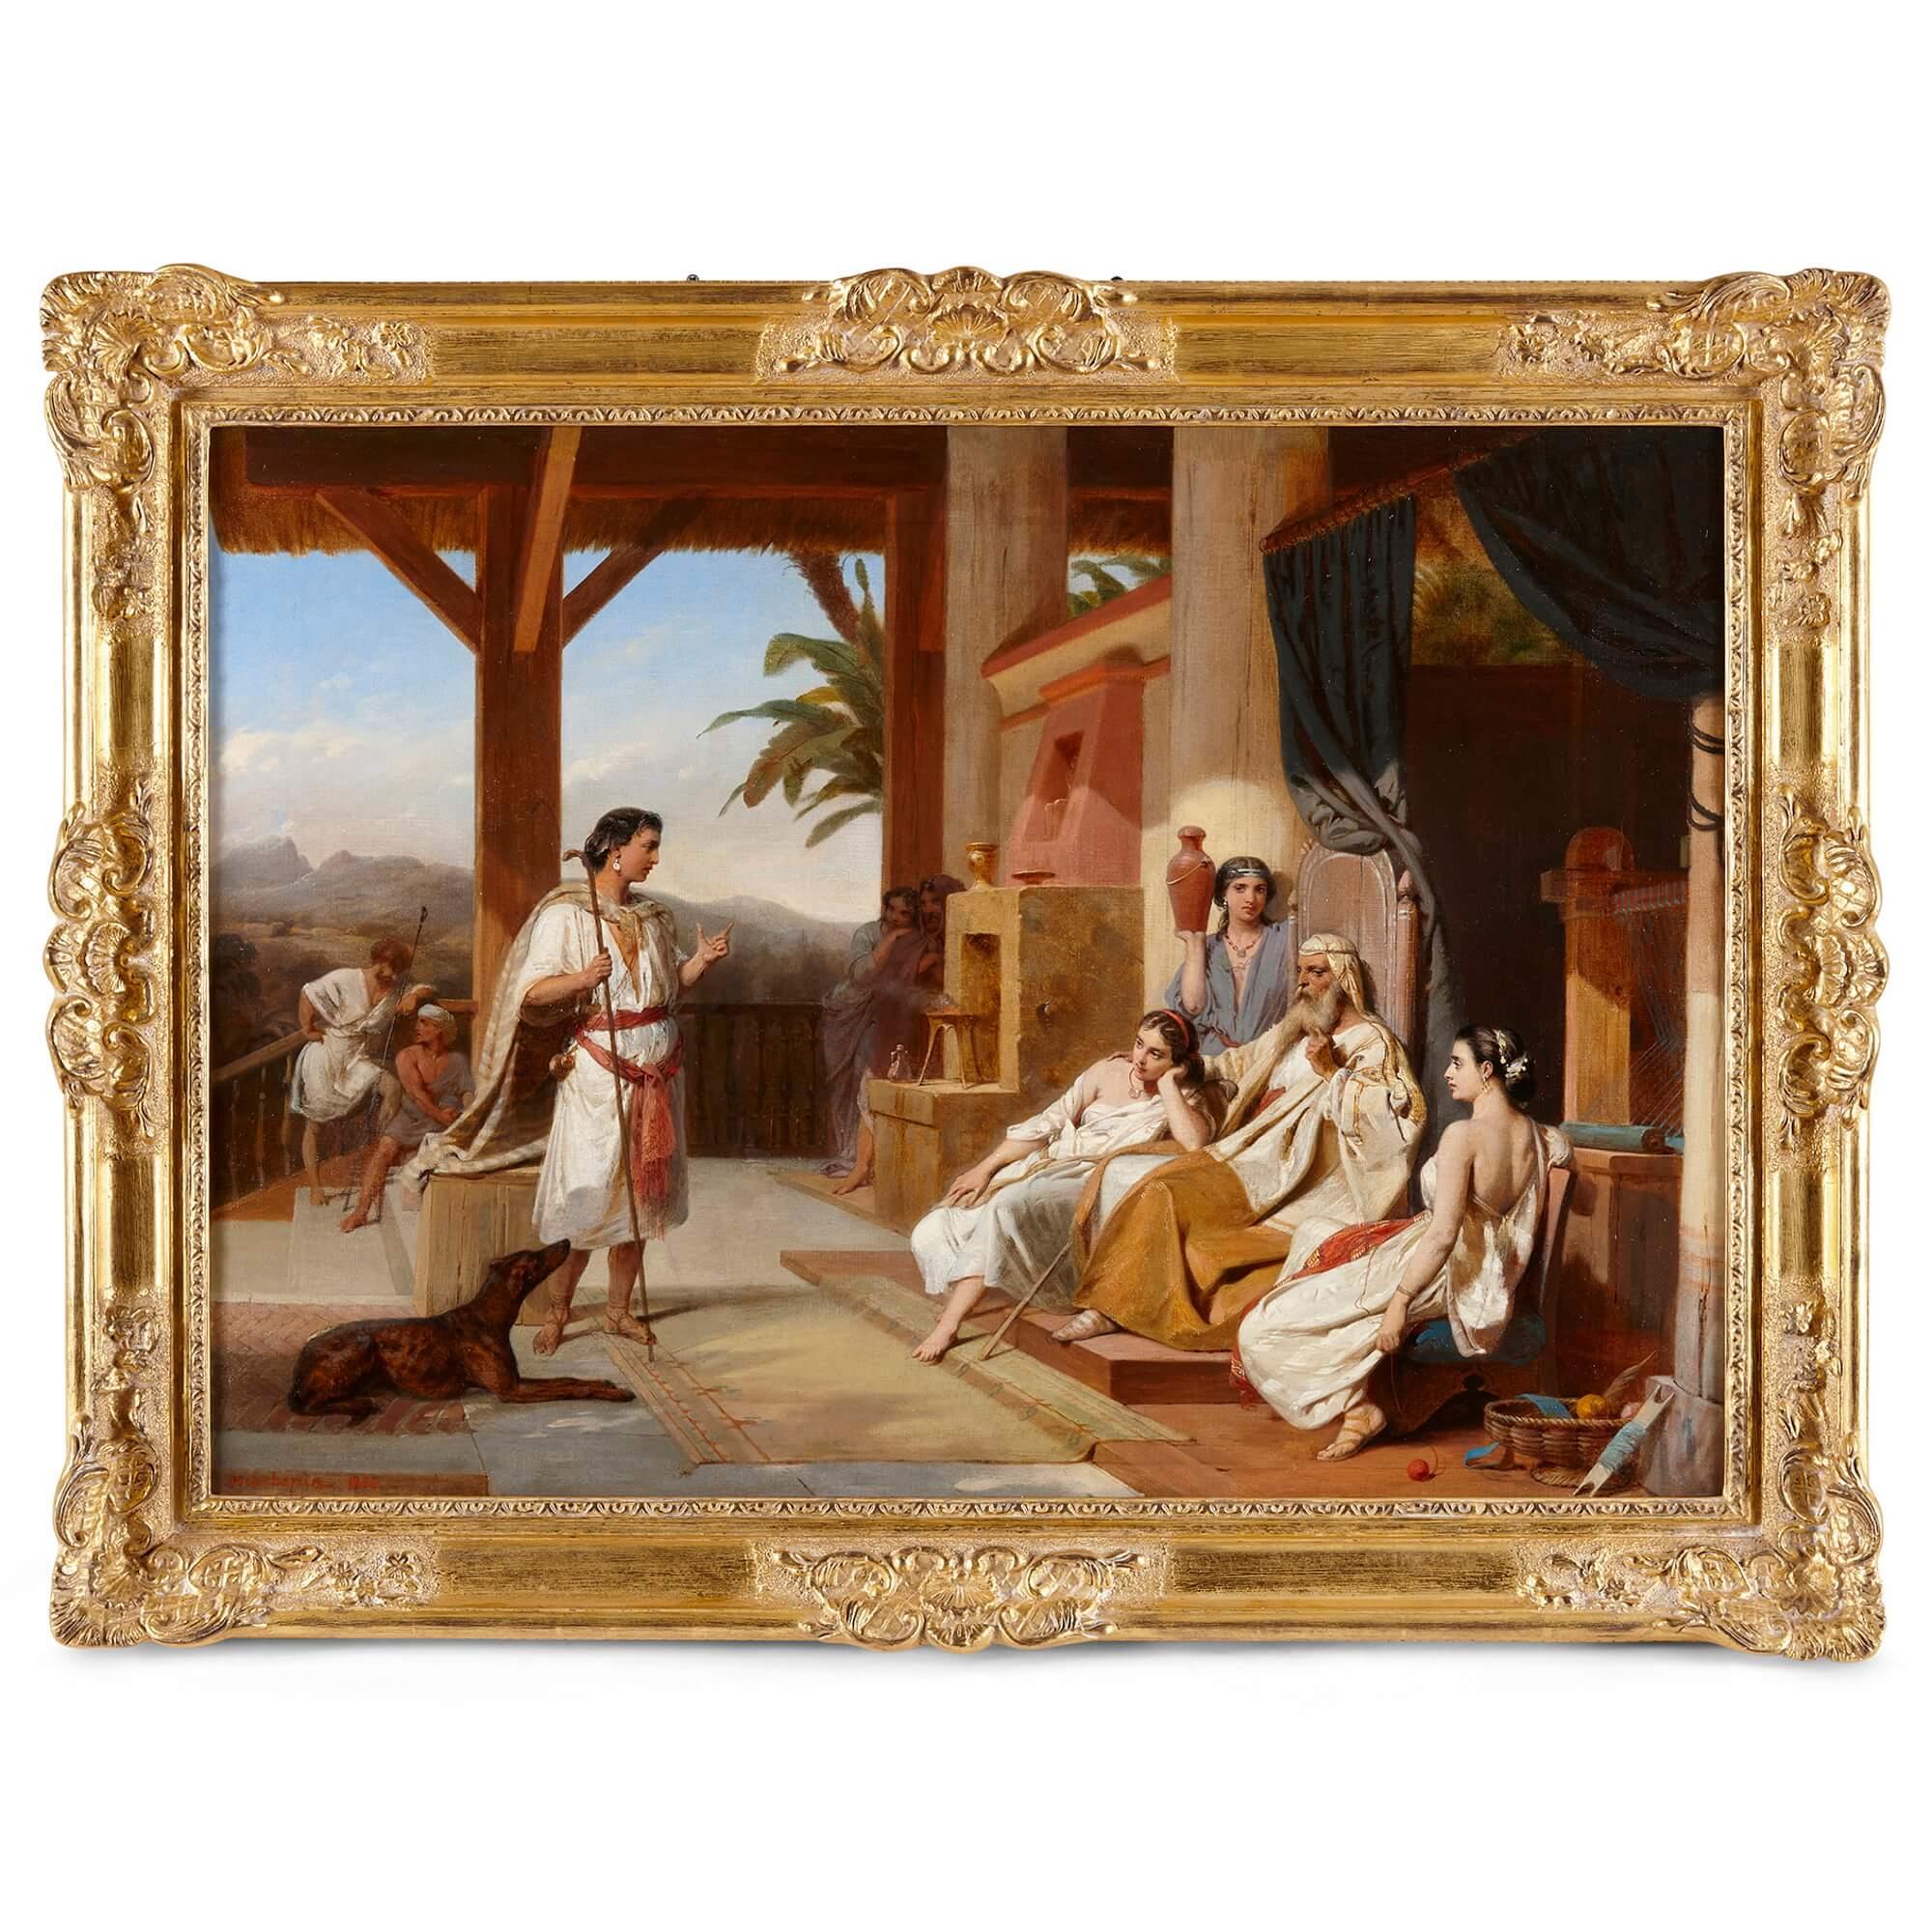 Henri Frédéric Schopin Figurative Painting - A Large French Orientalist Biblical Painting by H.F. Schopin